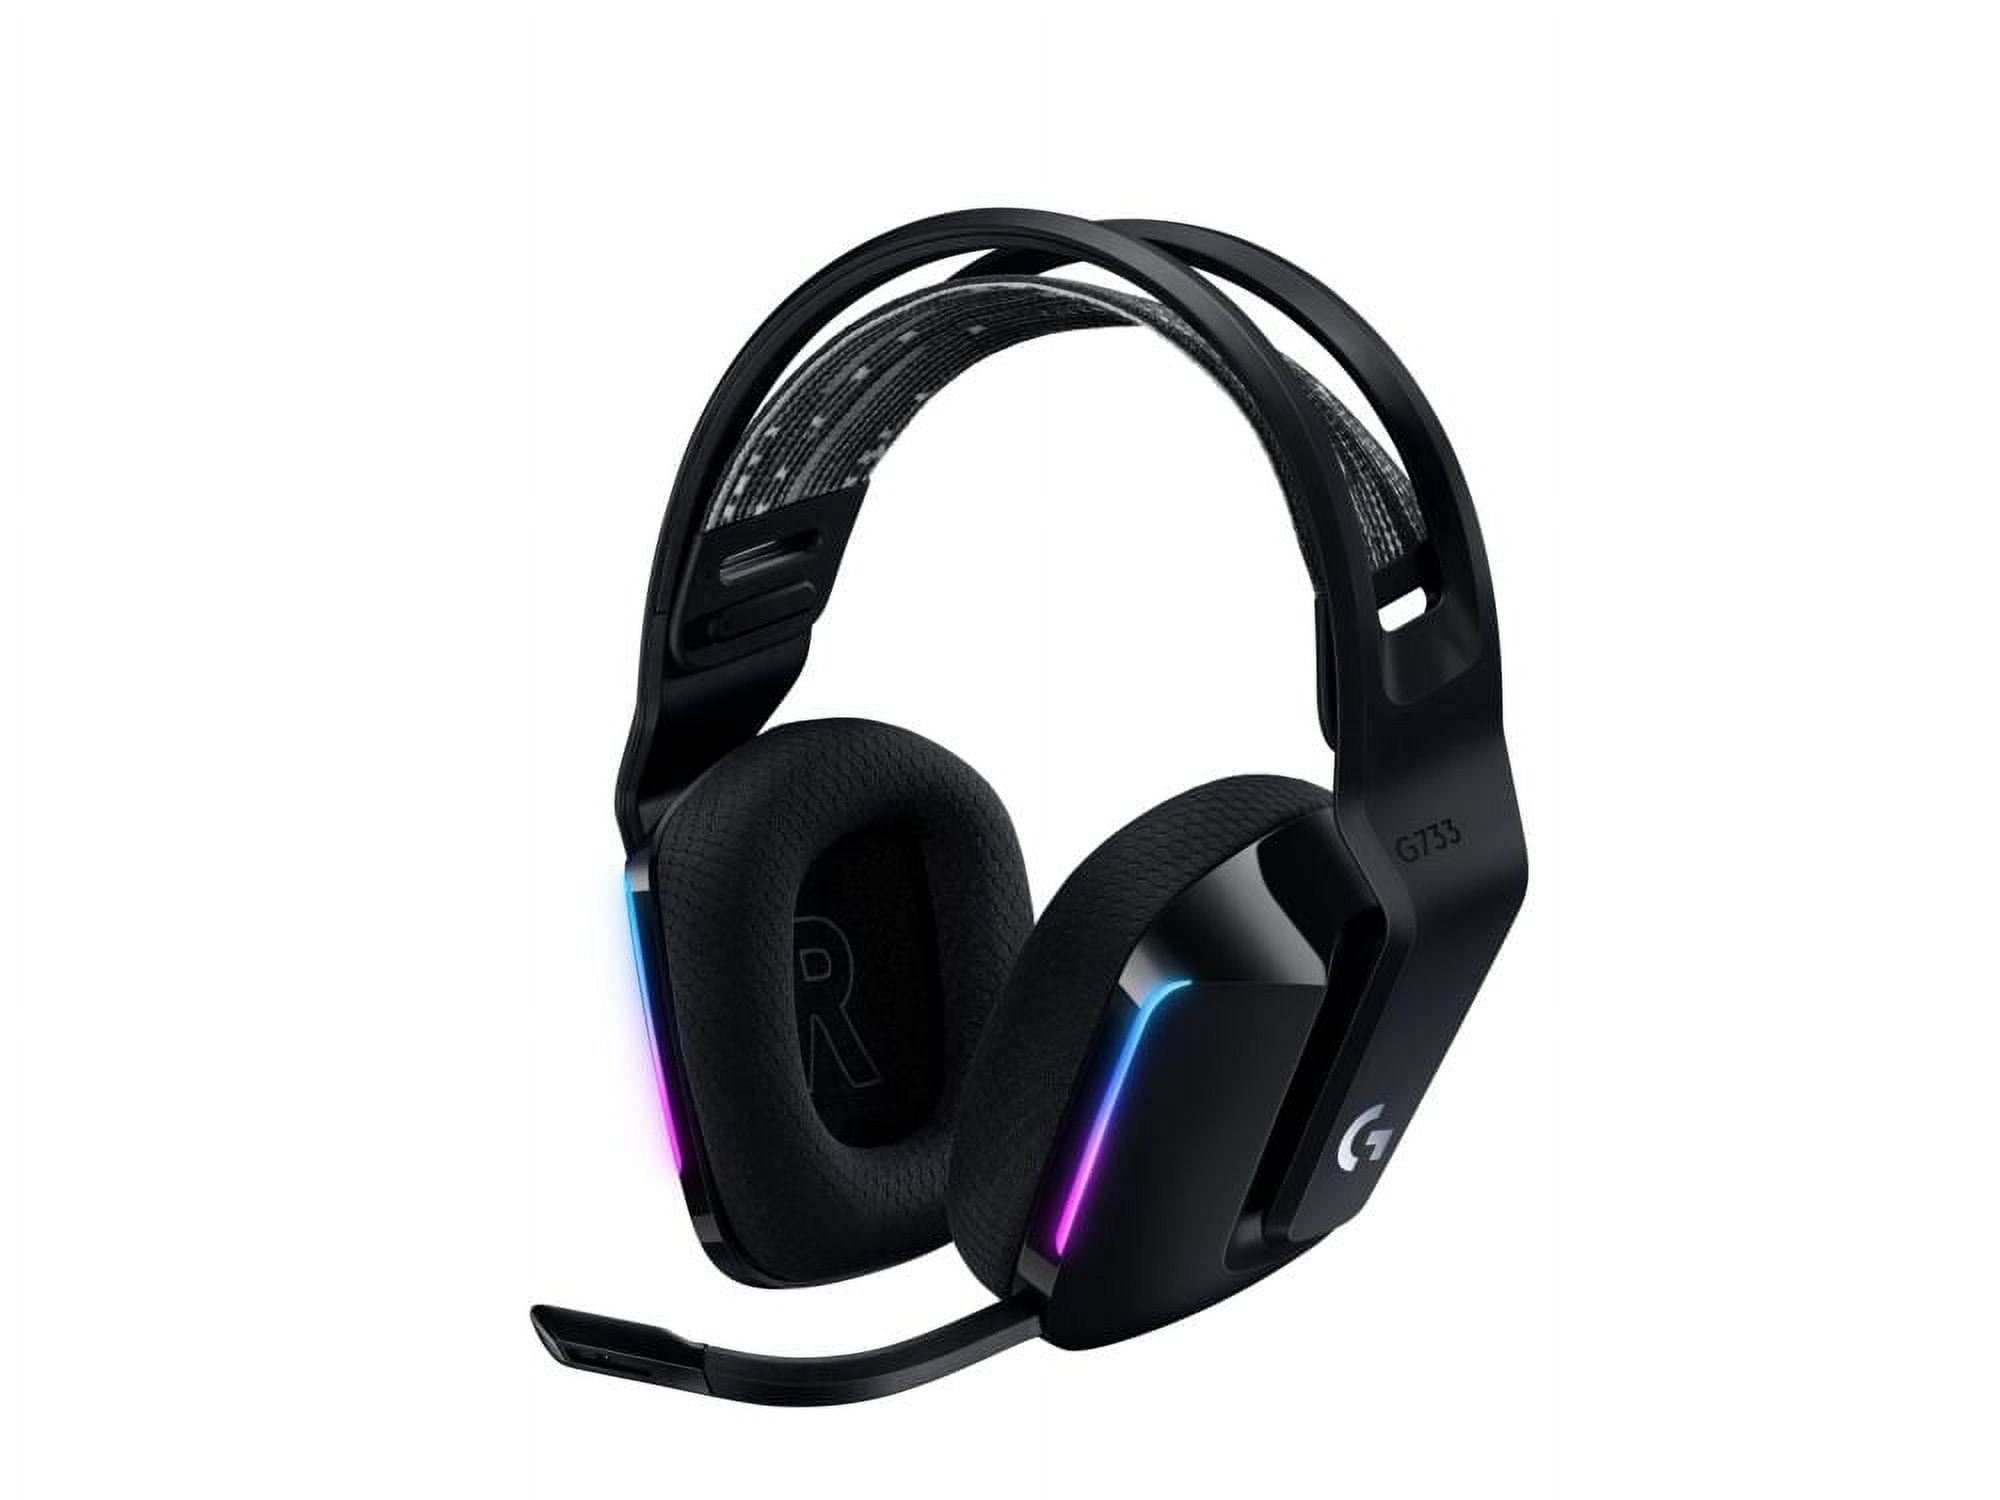 Gaming headset review: Logitech G733